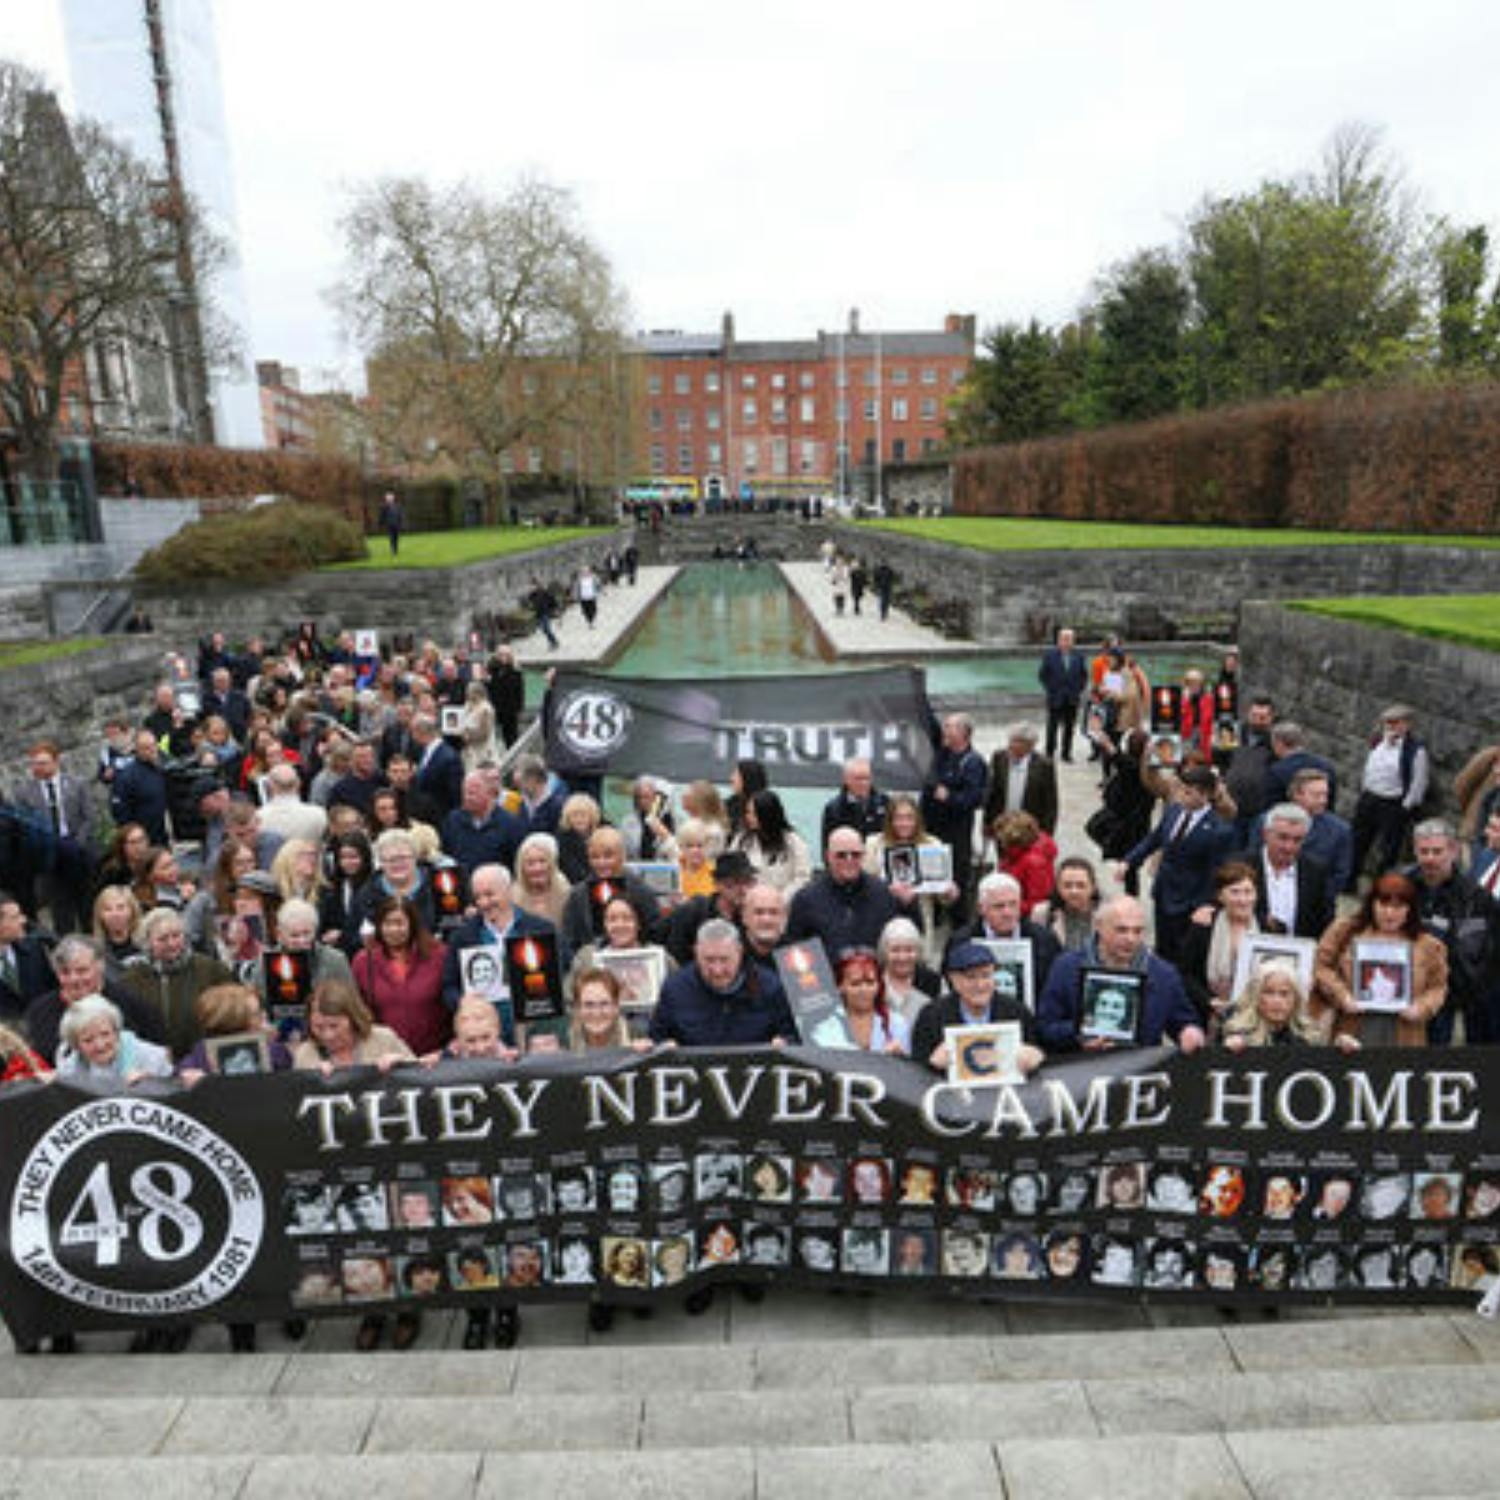 43 years on from the stardust tragedy, finally justice for the families